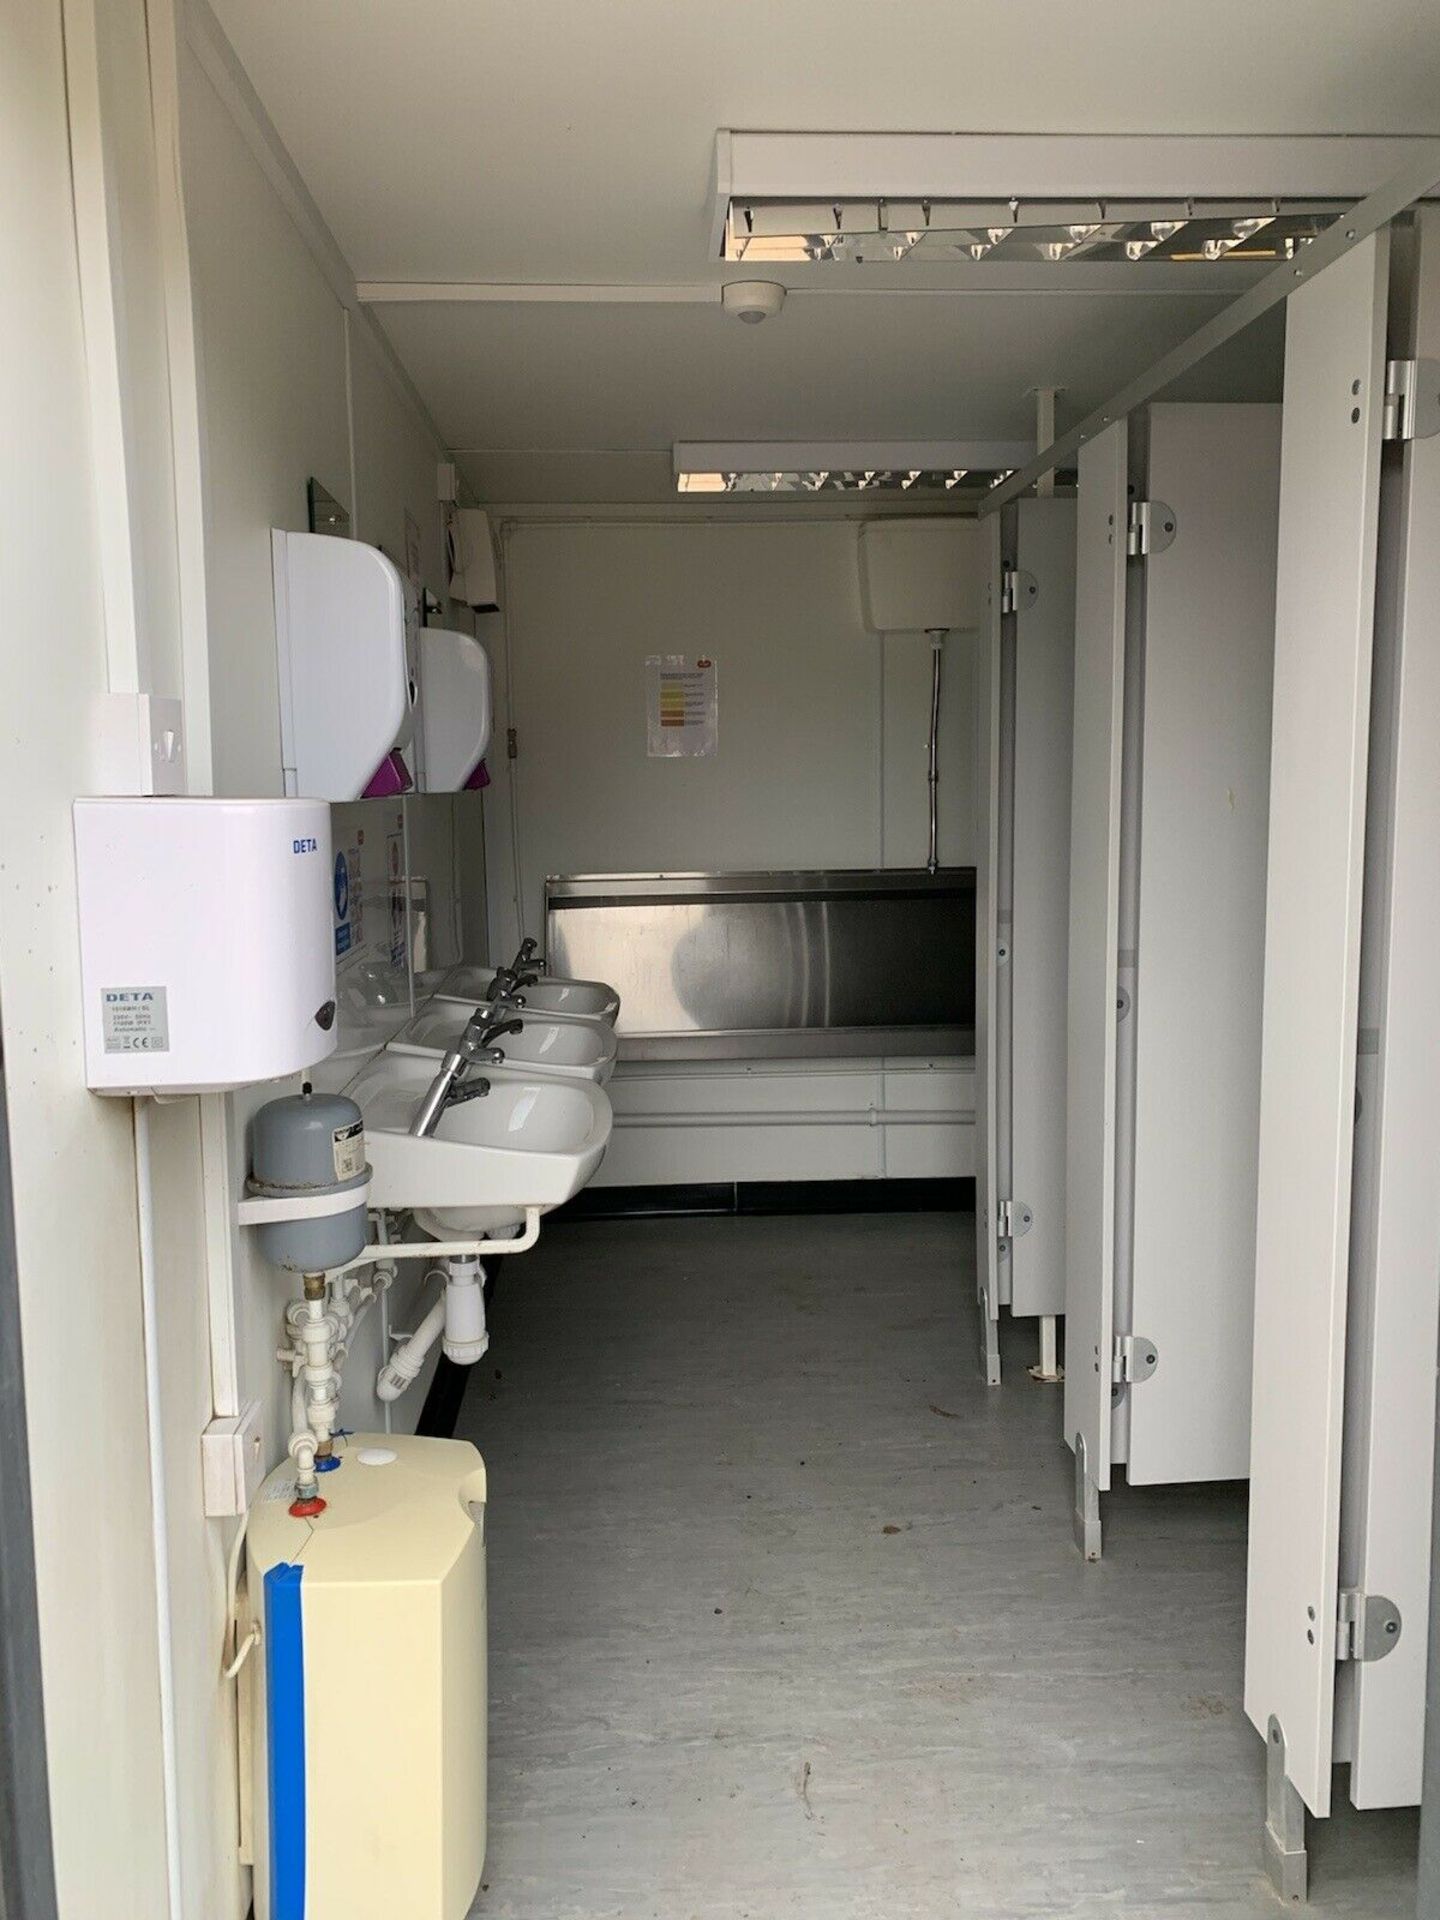 32ft Portable Toilet Block Drying Room Office Site - Image 2 of 11